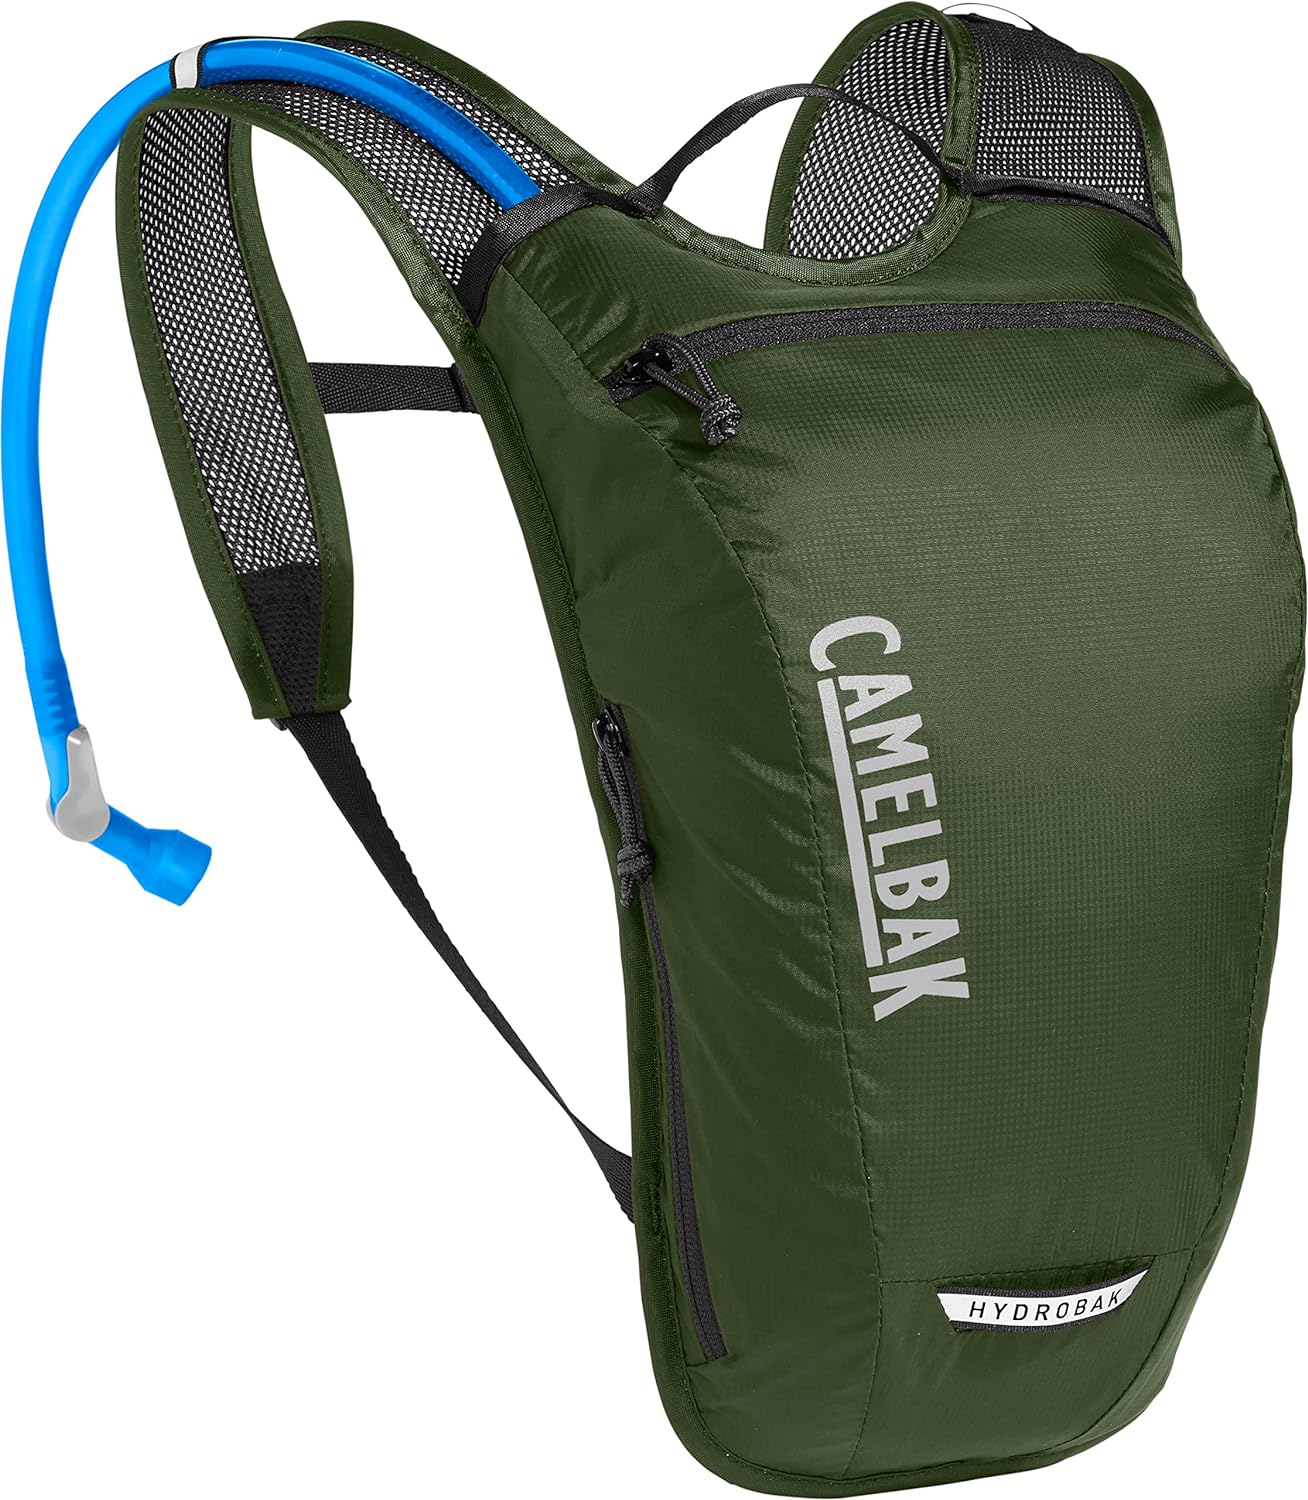 50-Oz CamelBak Hydrobak Light Bike Hydration Backpack (2 Colors) $30 + Free Shipping w/ Prime or on $35+